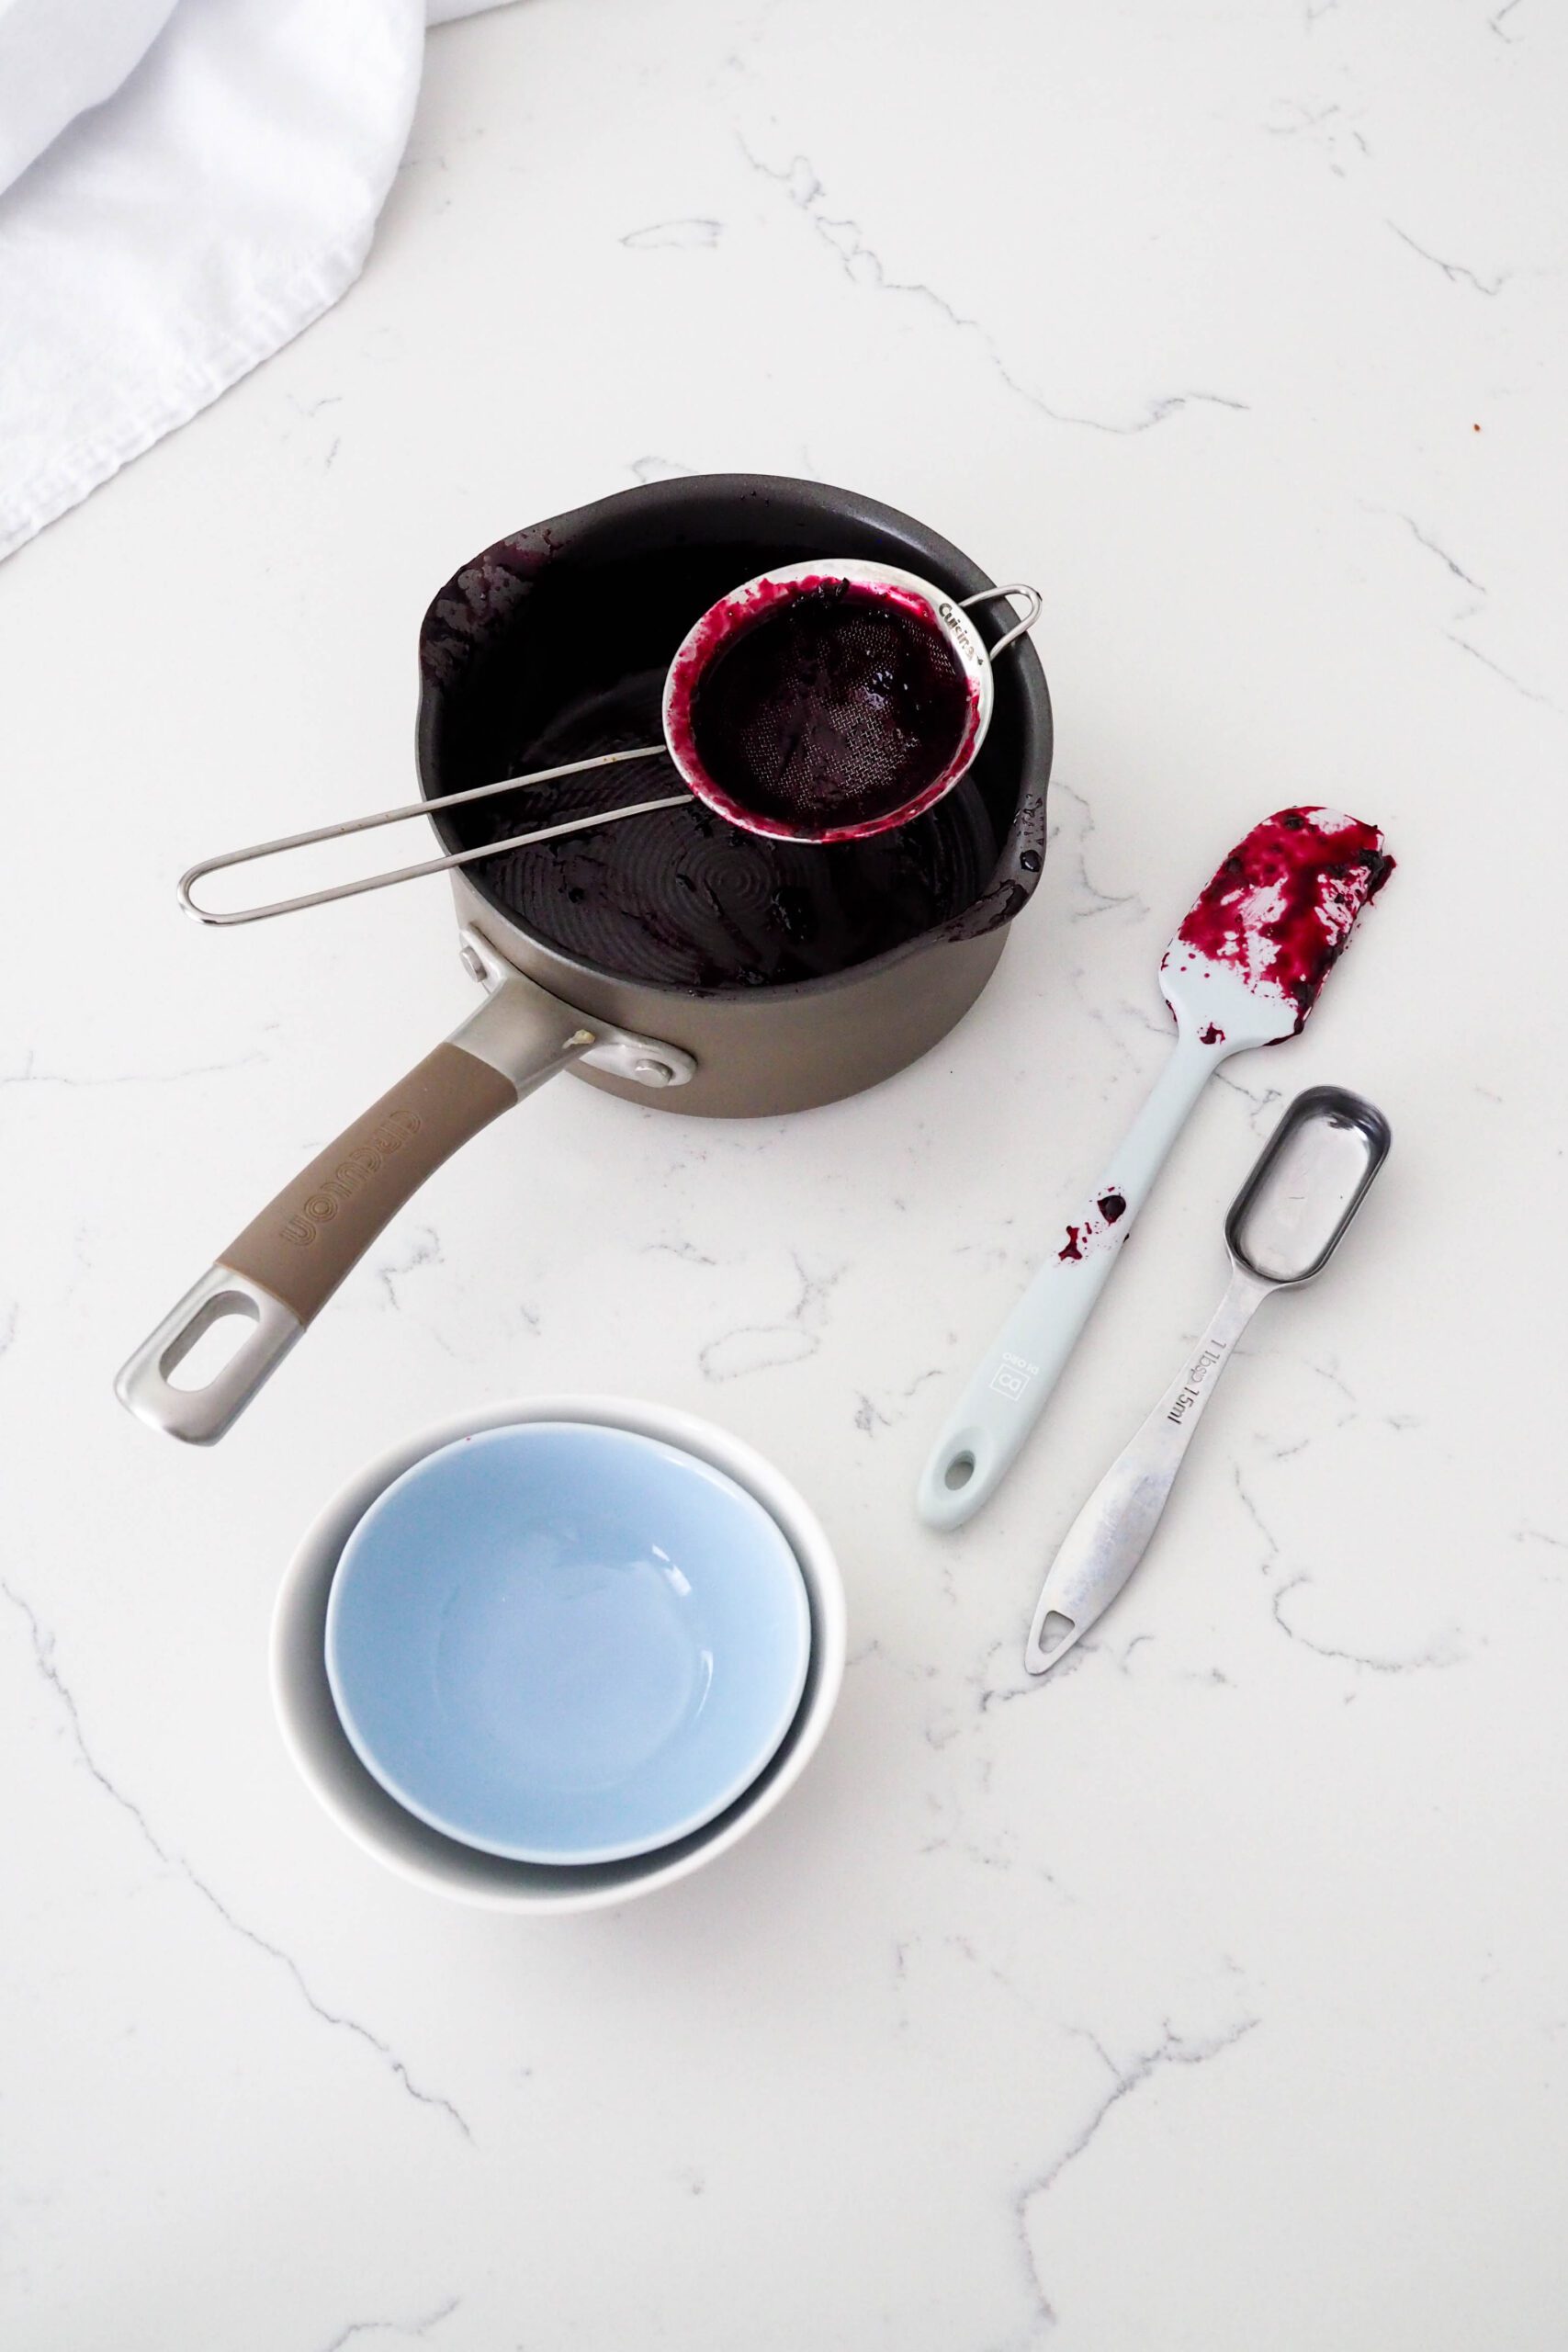 A small pot, strainer, spatula, measuring spoon, and two small bowls on a counter with remnants of blueberry syrup.